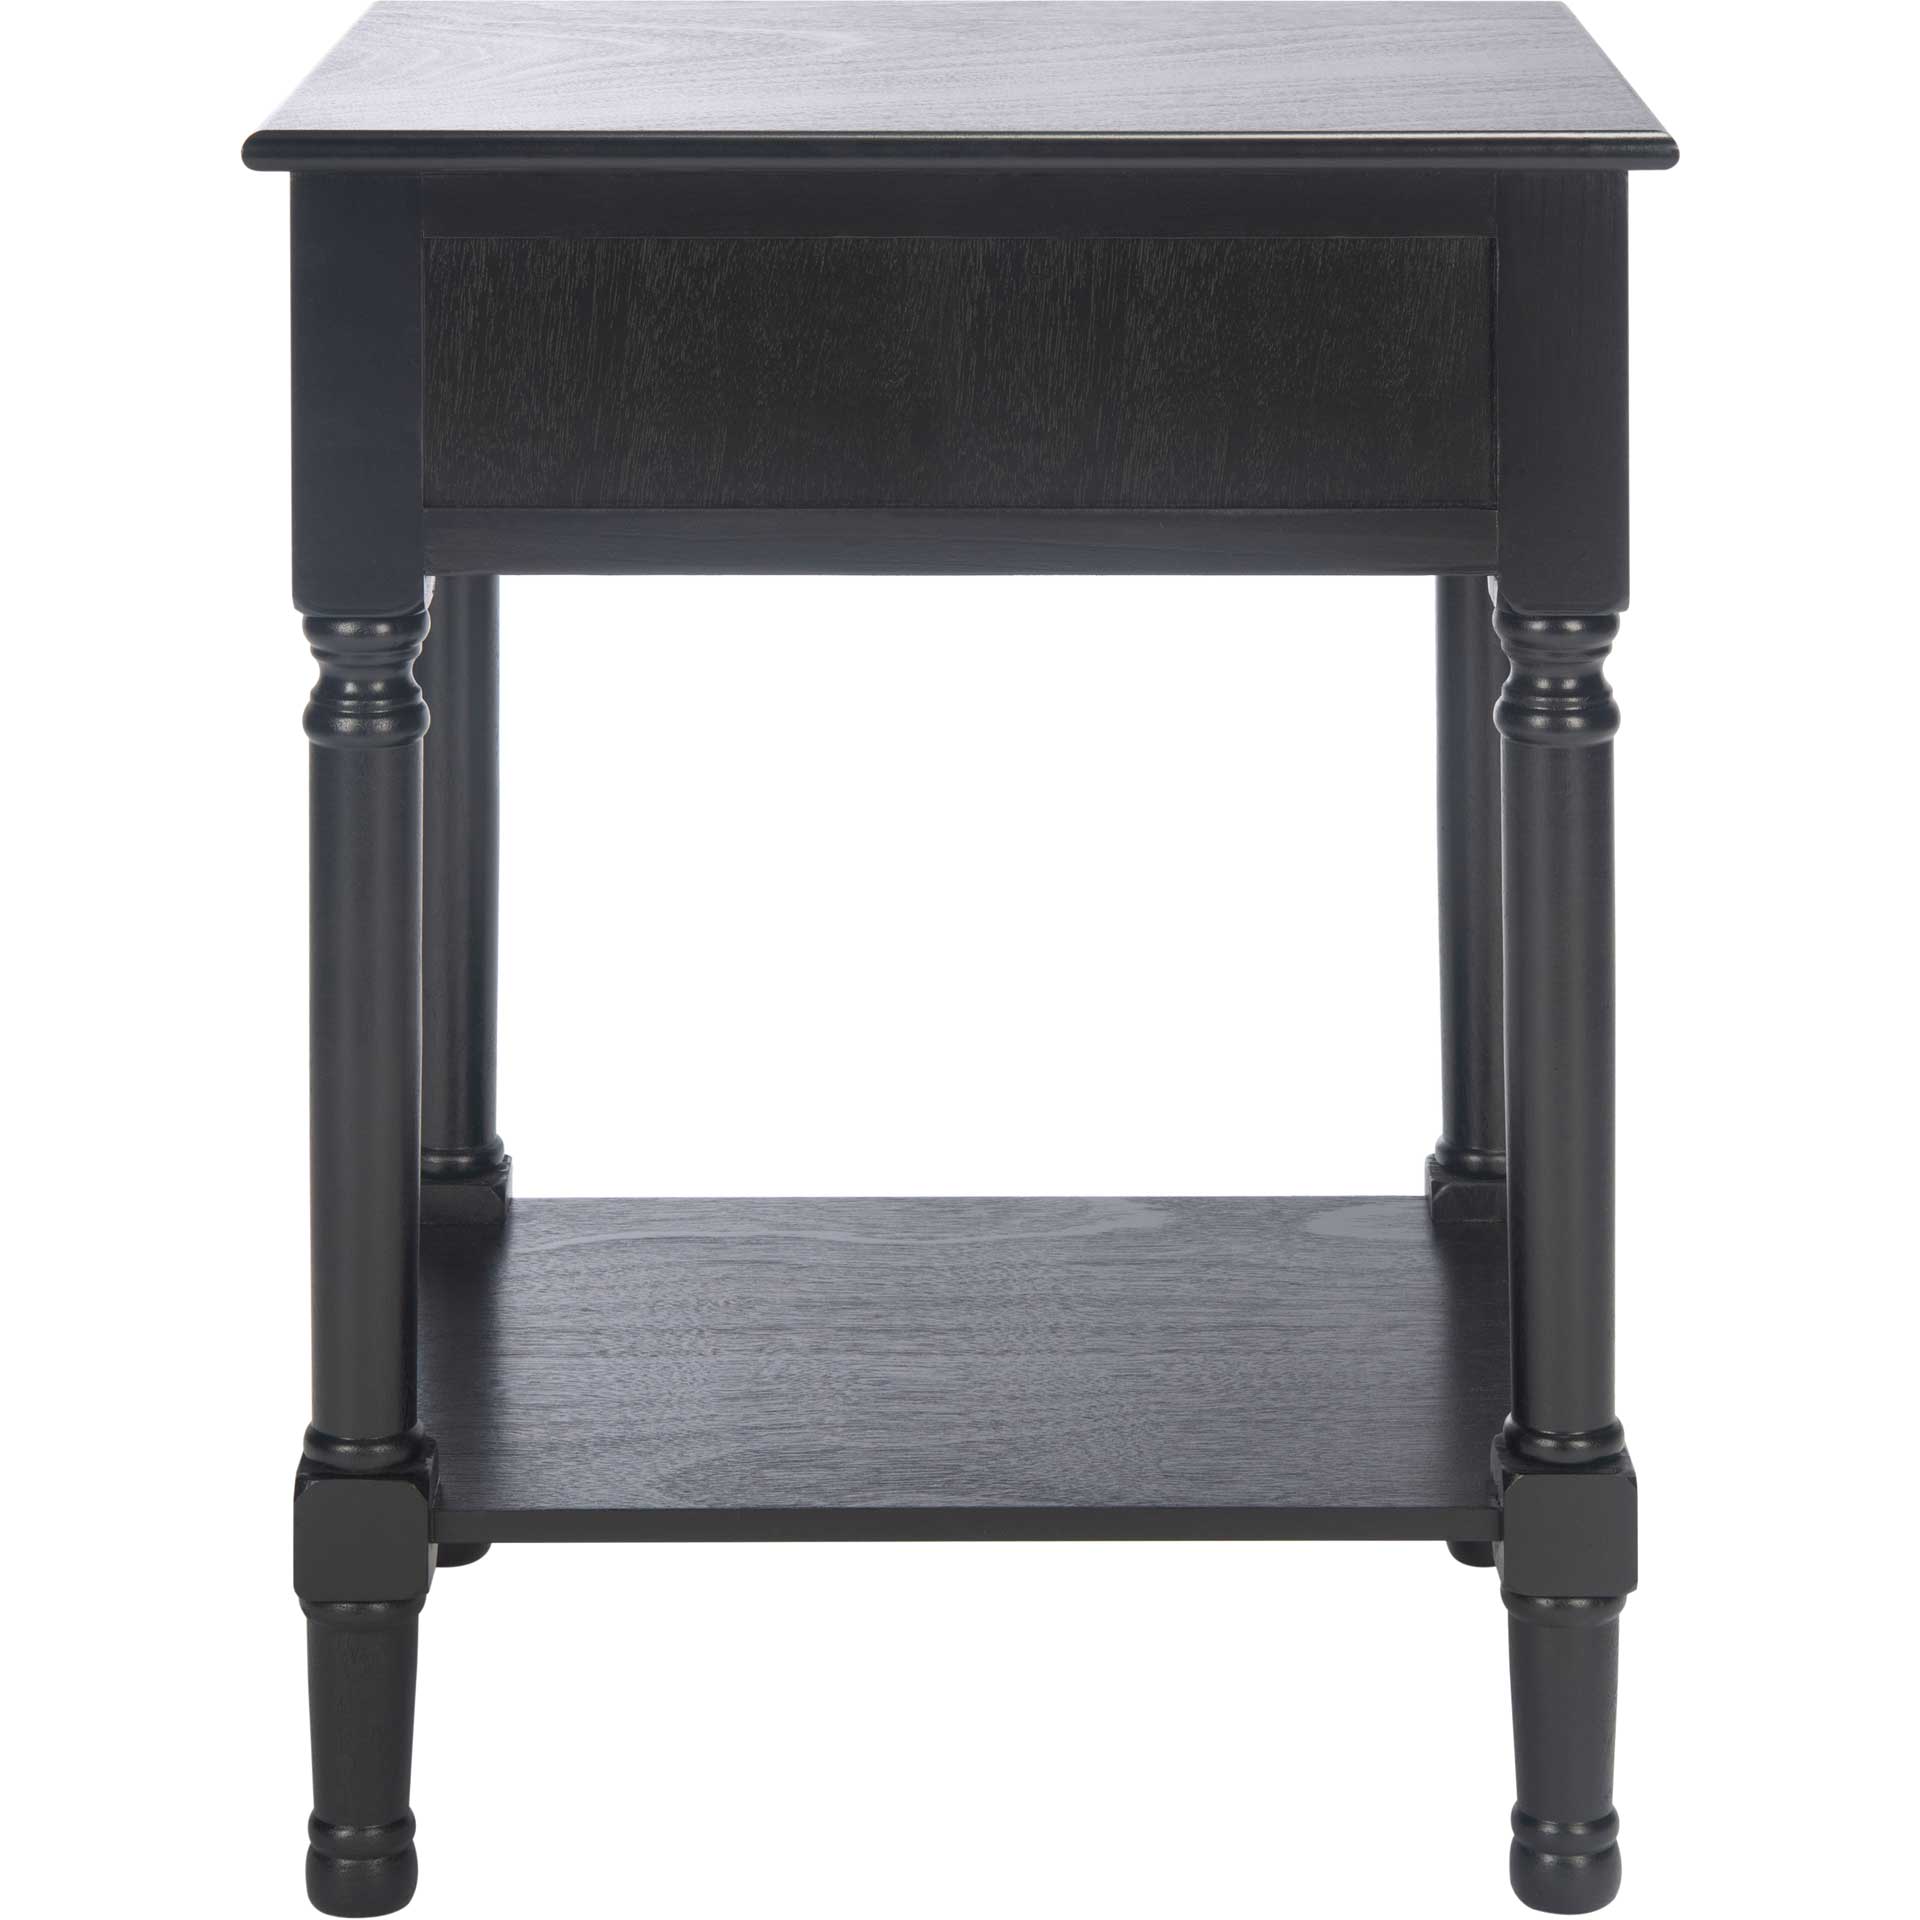 Hale 1 Drawer Accent Table Black